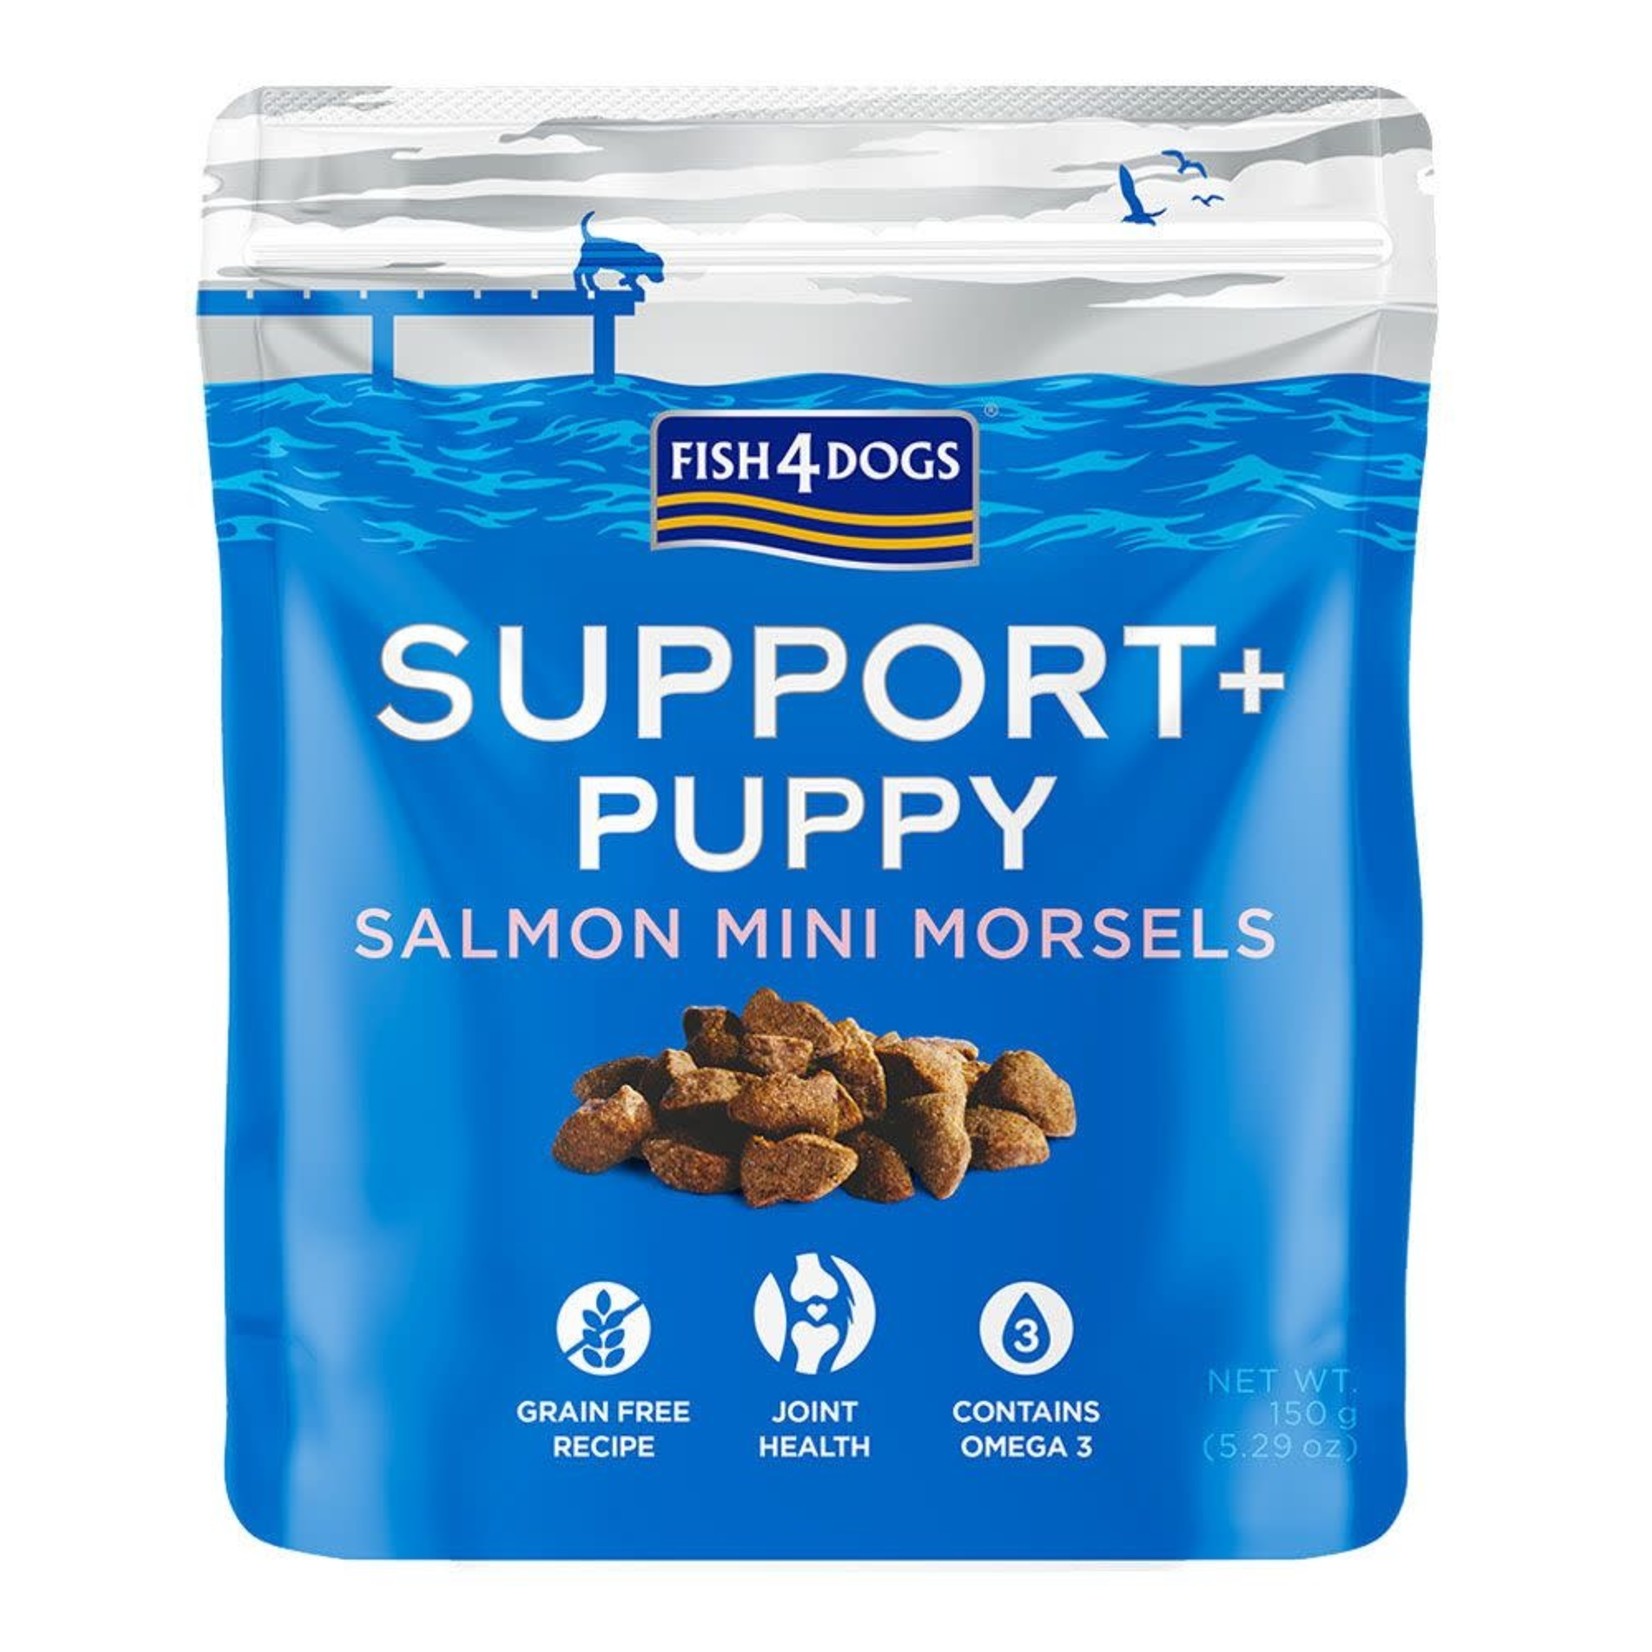 Fish4Dogs Support+ Puppy Joint Health Salmon Morsels Dog Treats, 150g